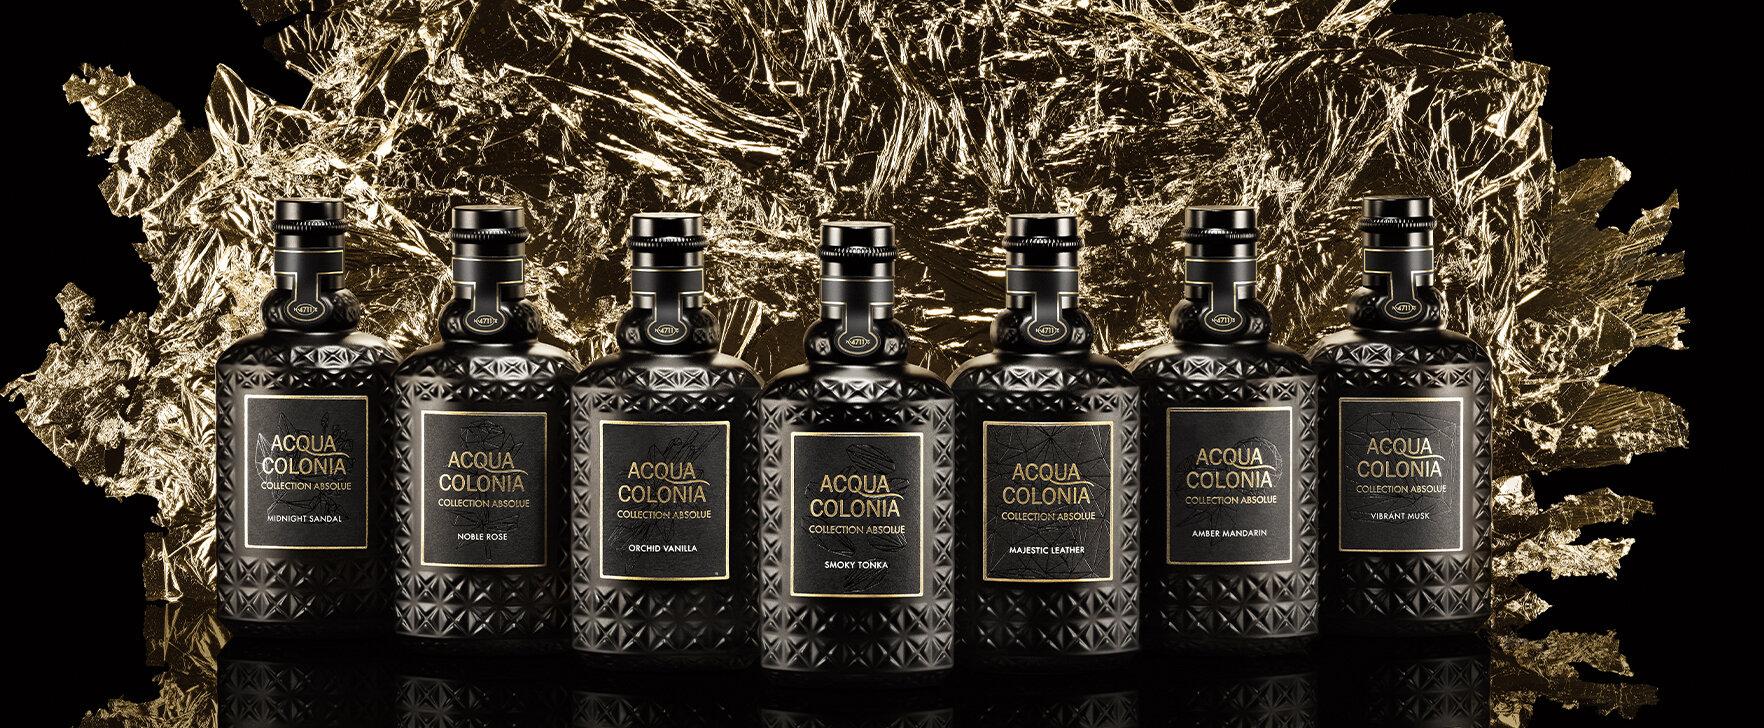 An Ode to Haute Perfumery: The New Acqua Colonia Collection Absolue by 4711